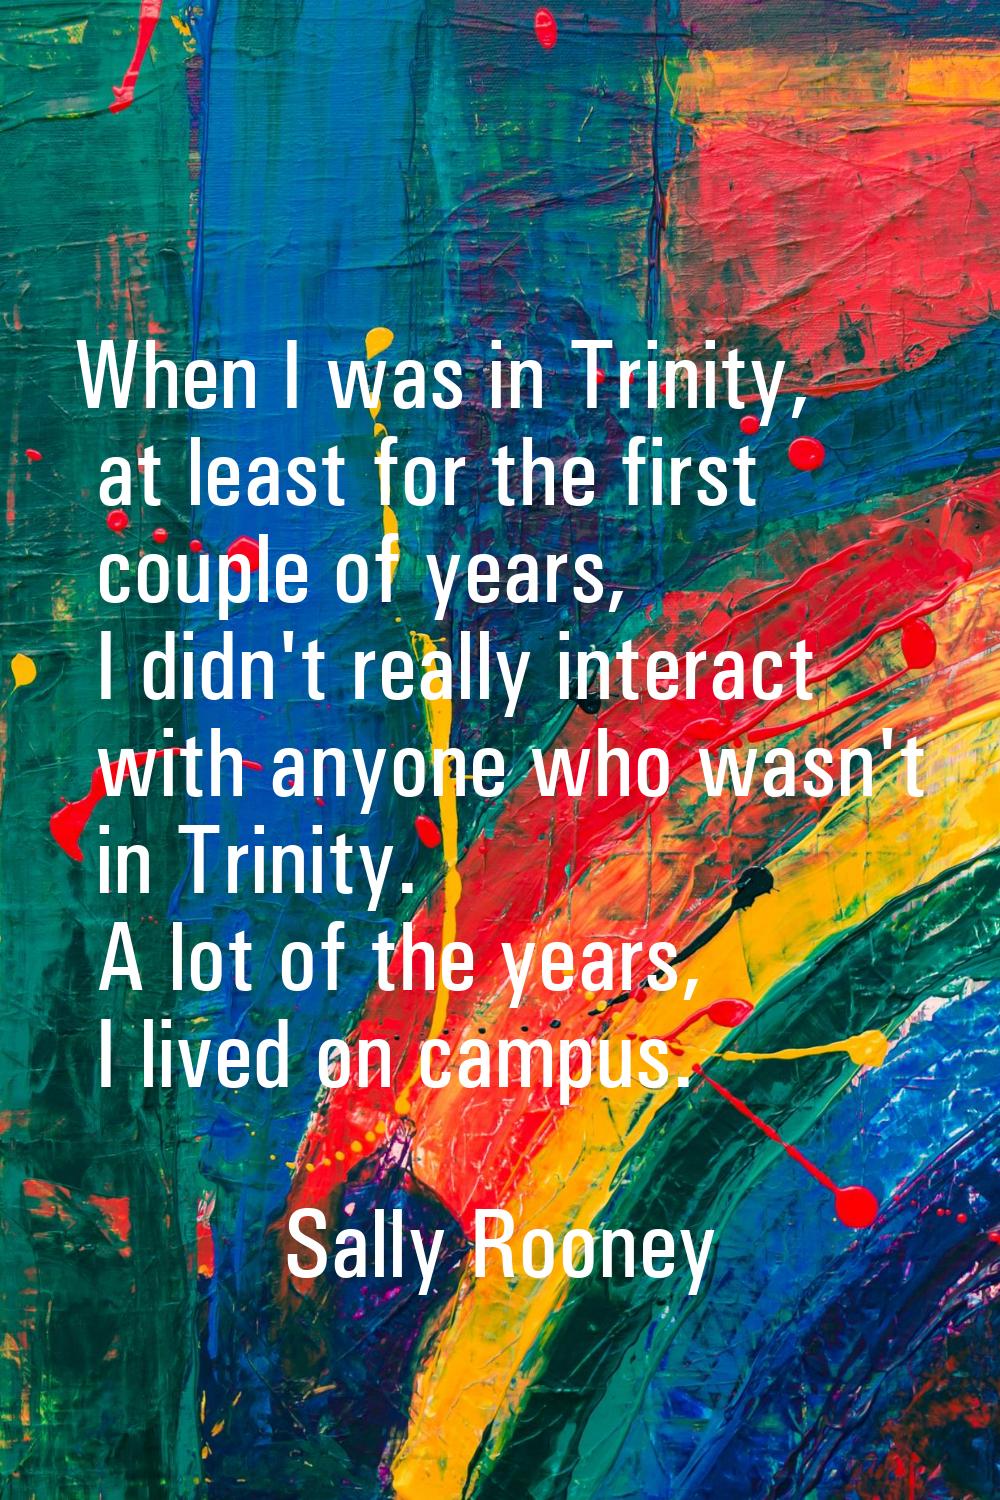 When I was in Trinity, at least for the first couple of years, I didn't really interact with anyone